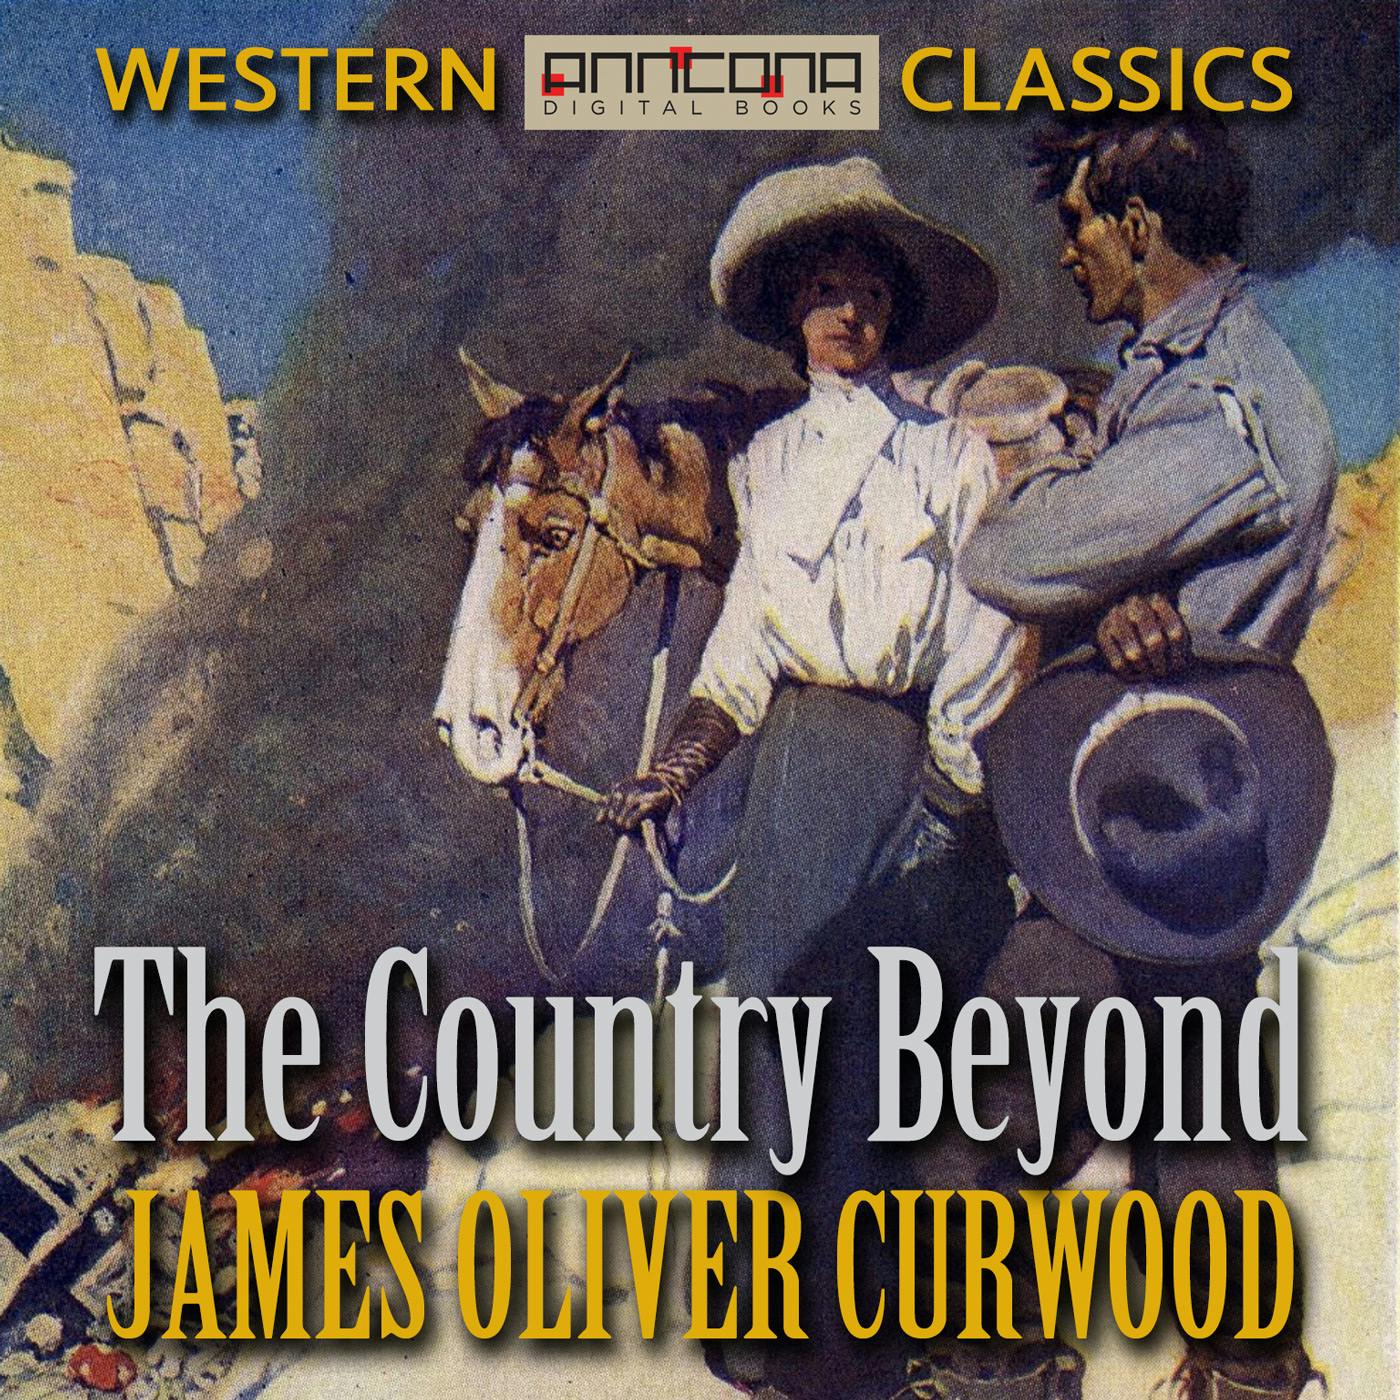 The Country Beyond - James Oliver Curwood